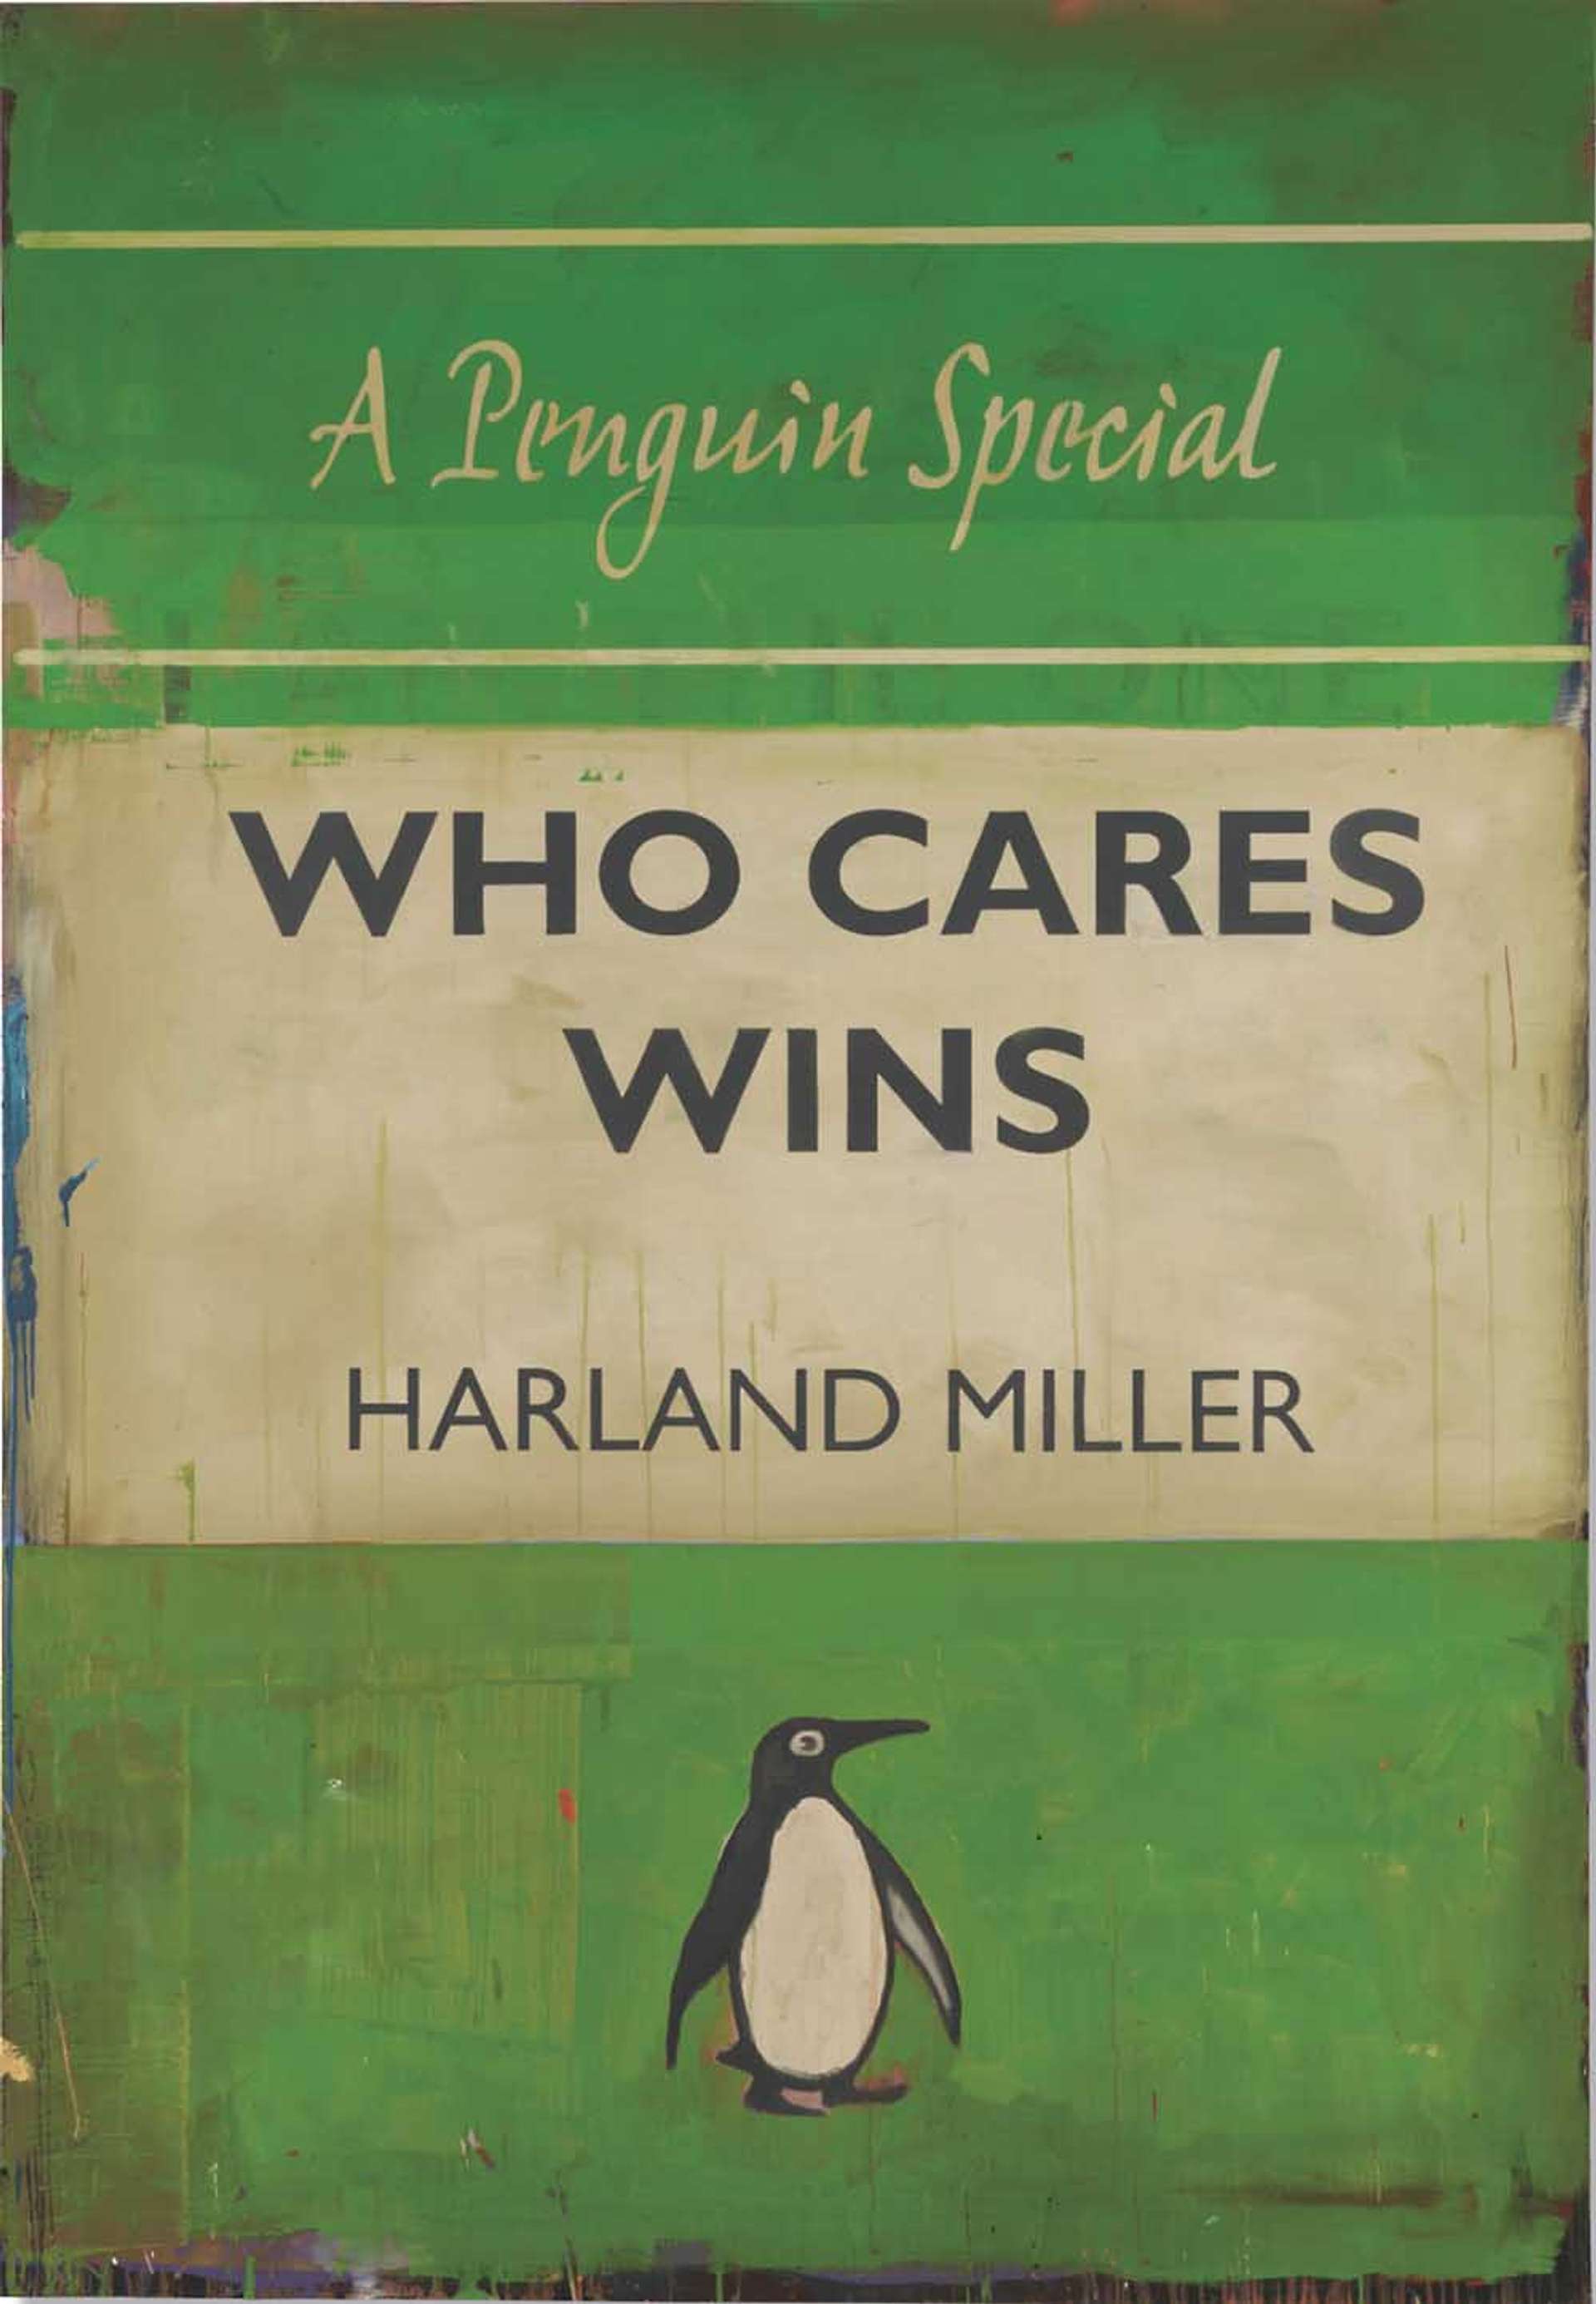 Who Cares Wins by Harland Miller